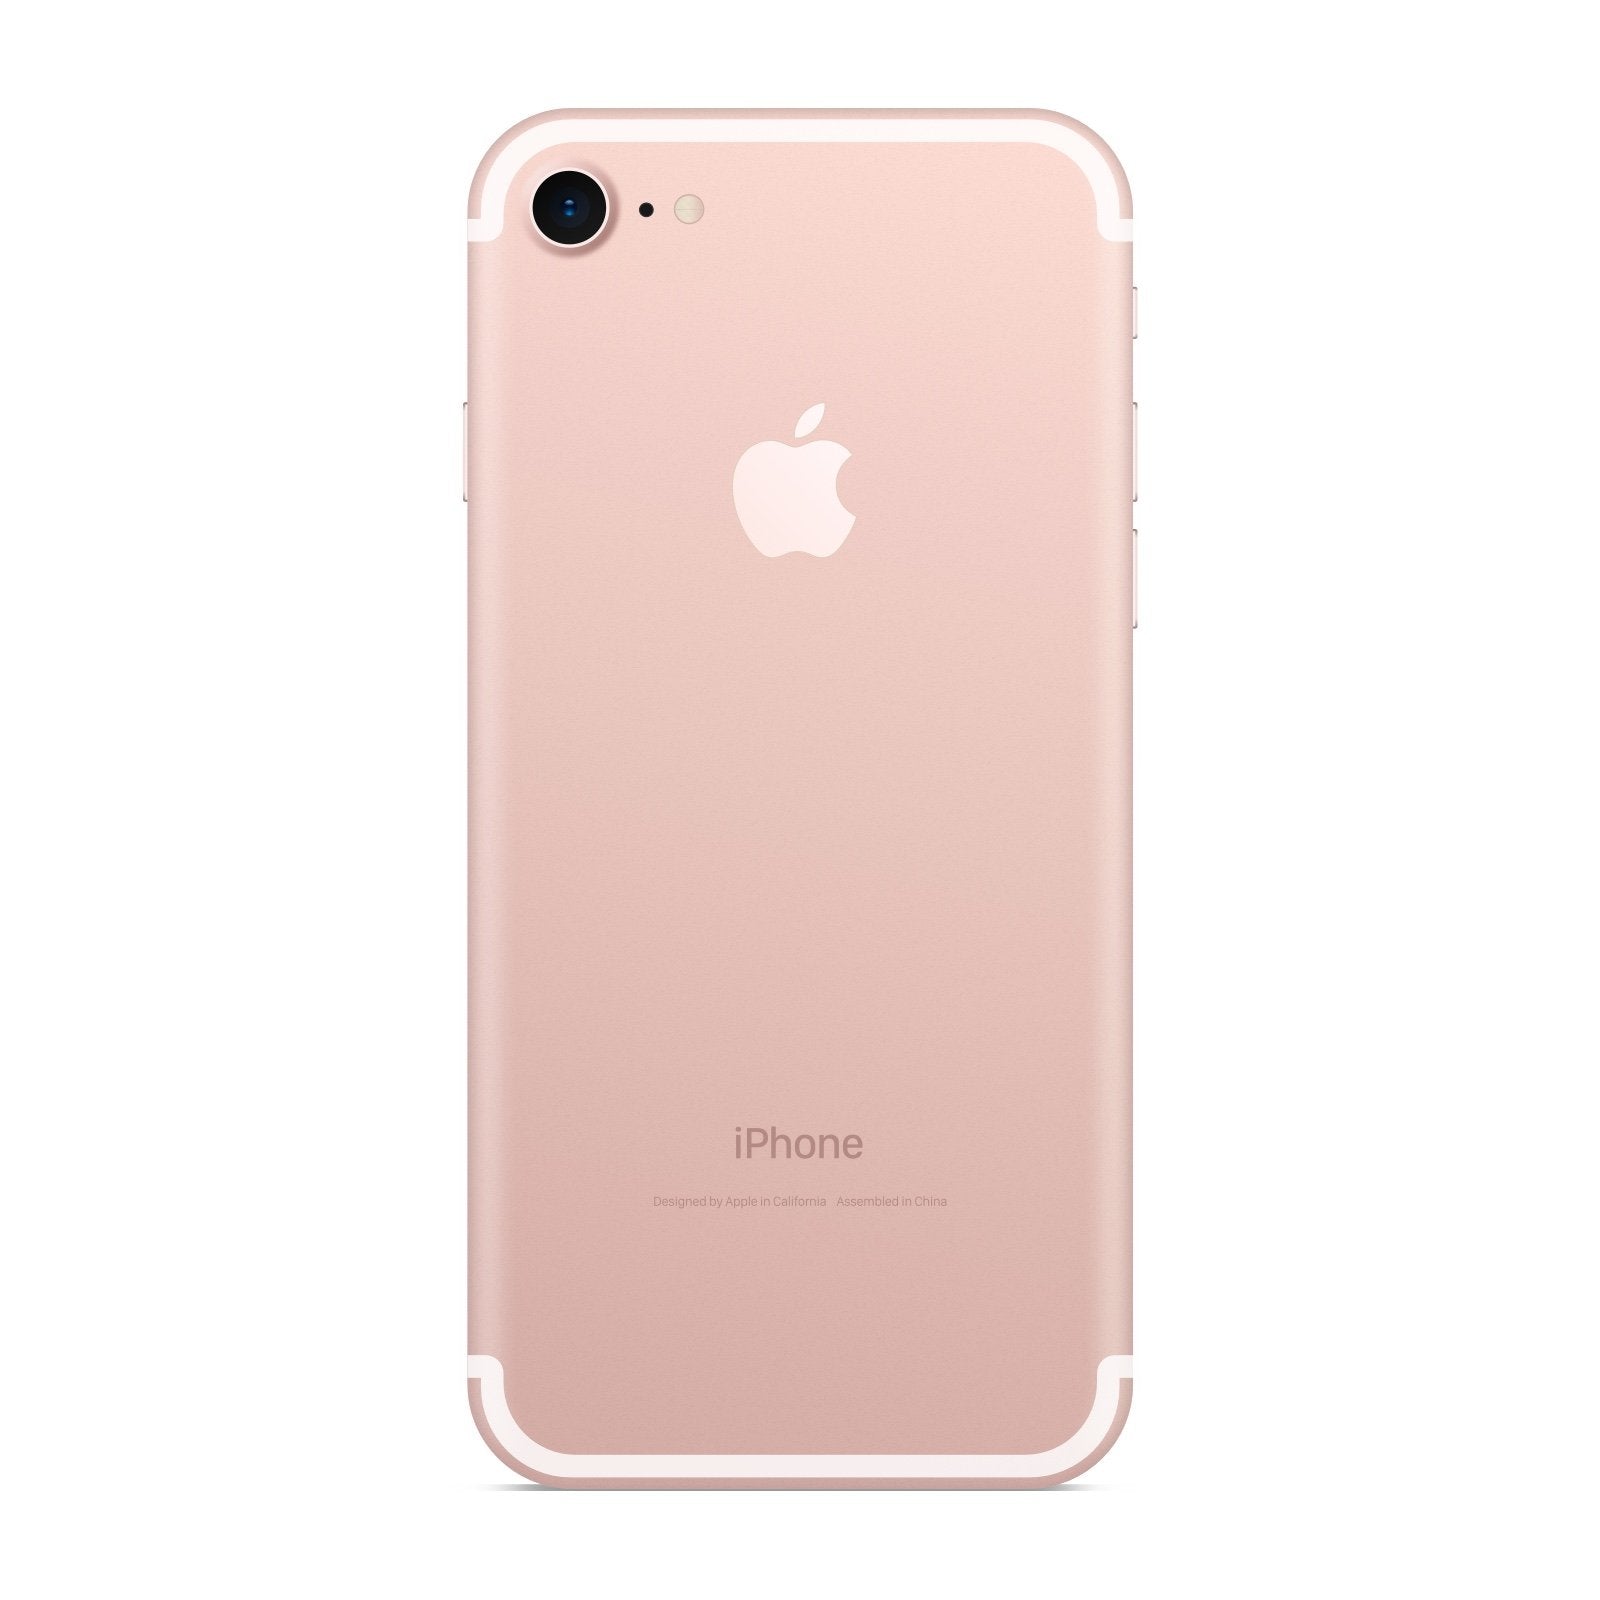 iPhone 7 (With Free Tempered Glass) [Demo] - Rose Gold